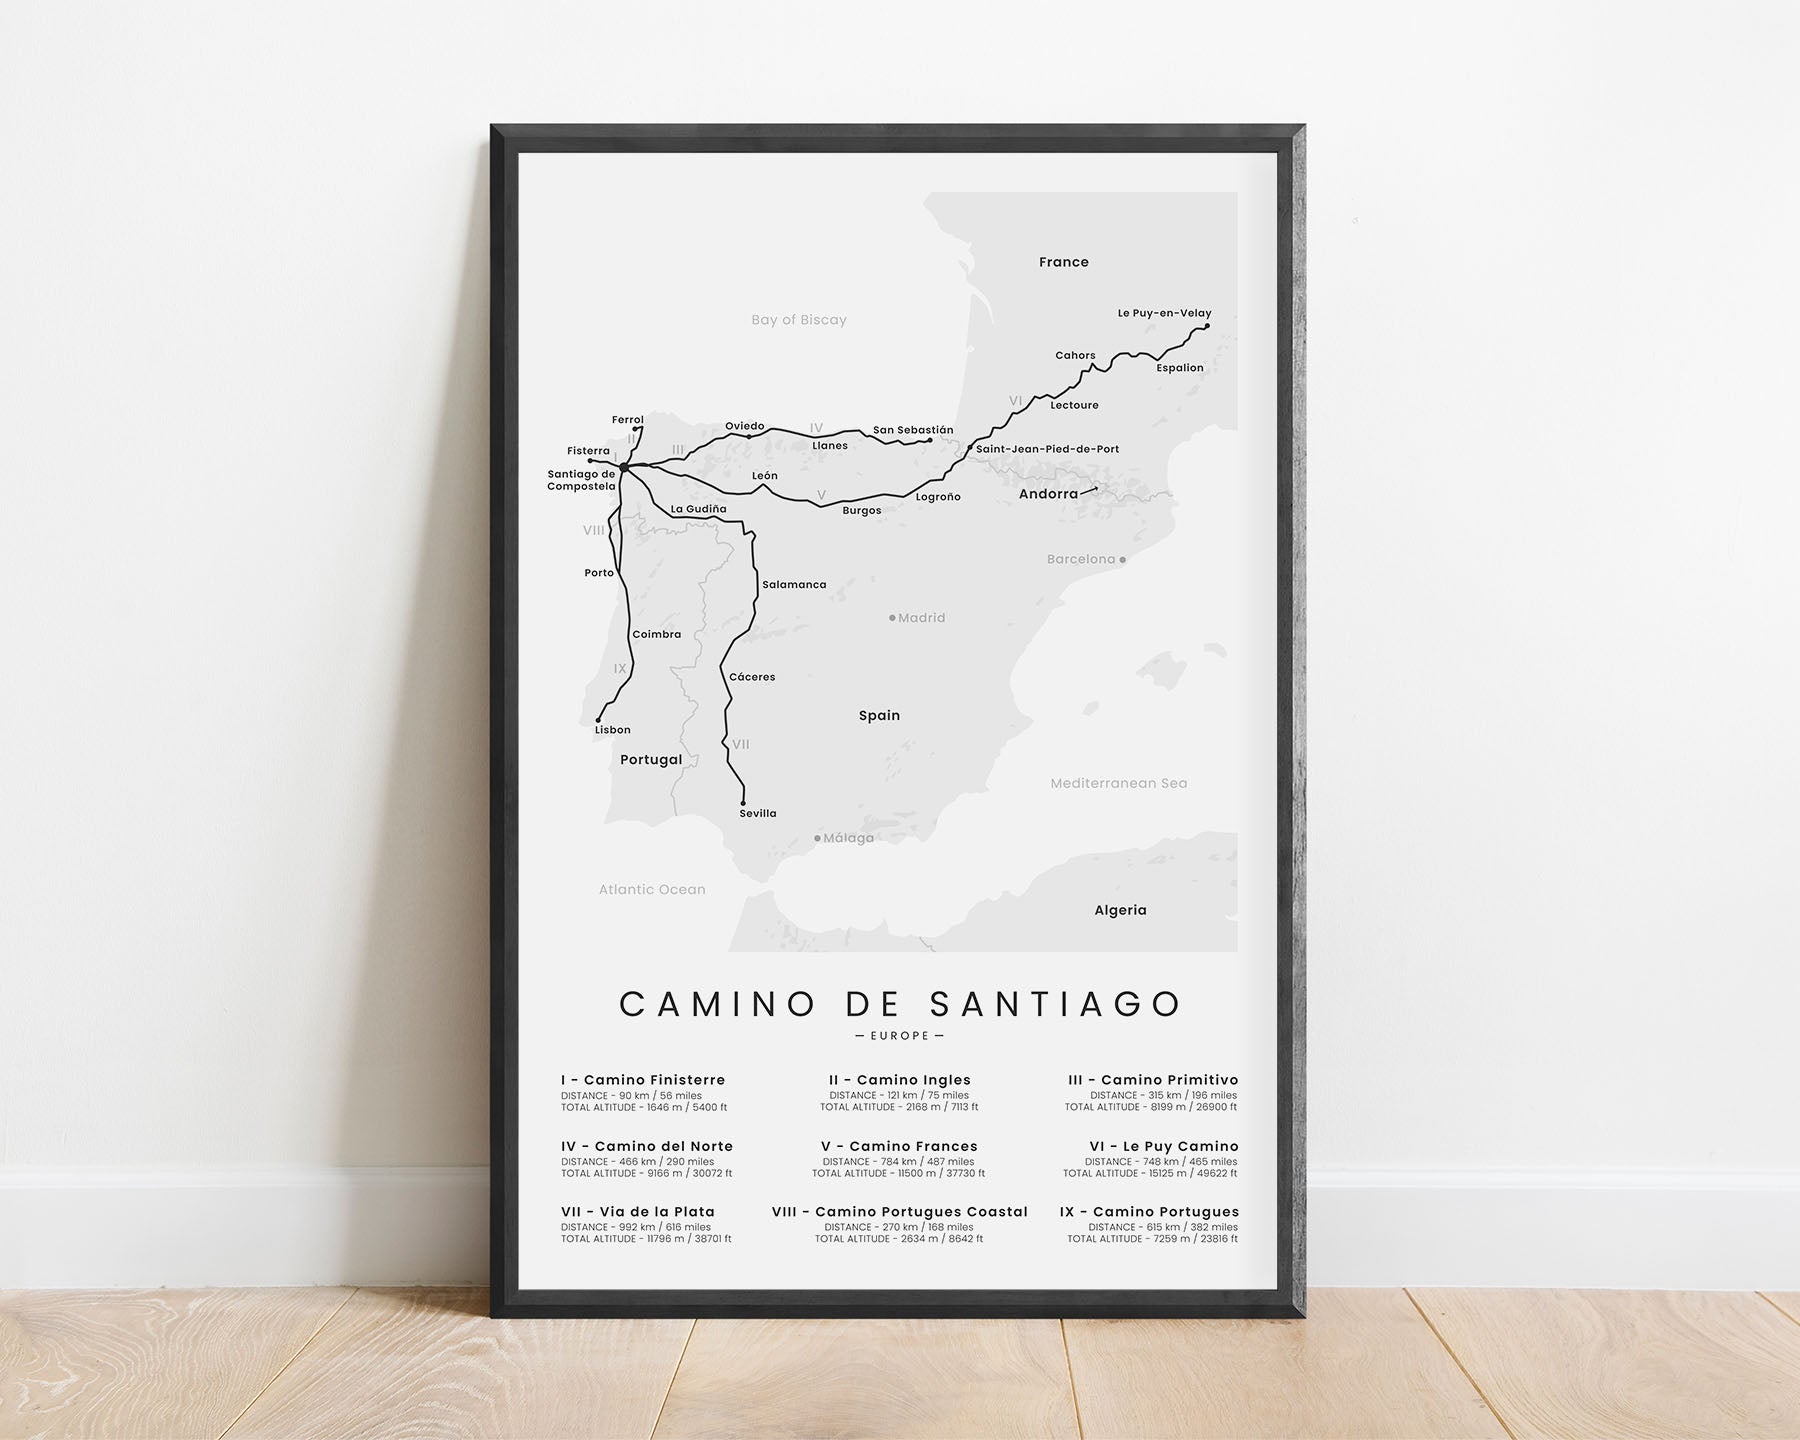 Camino de Santiago (Pyrenees) route poster with white background